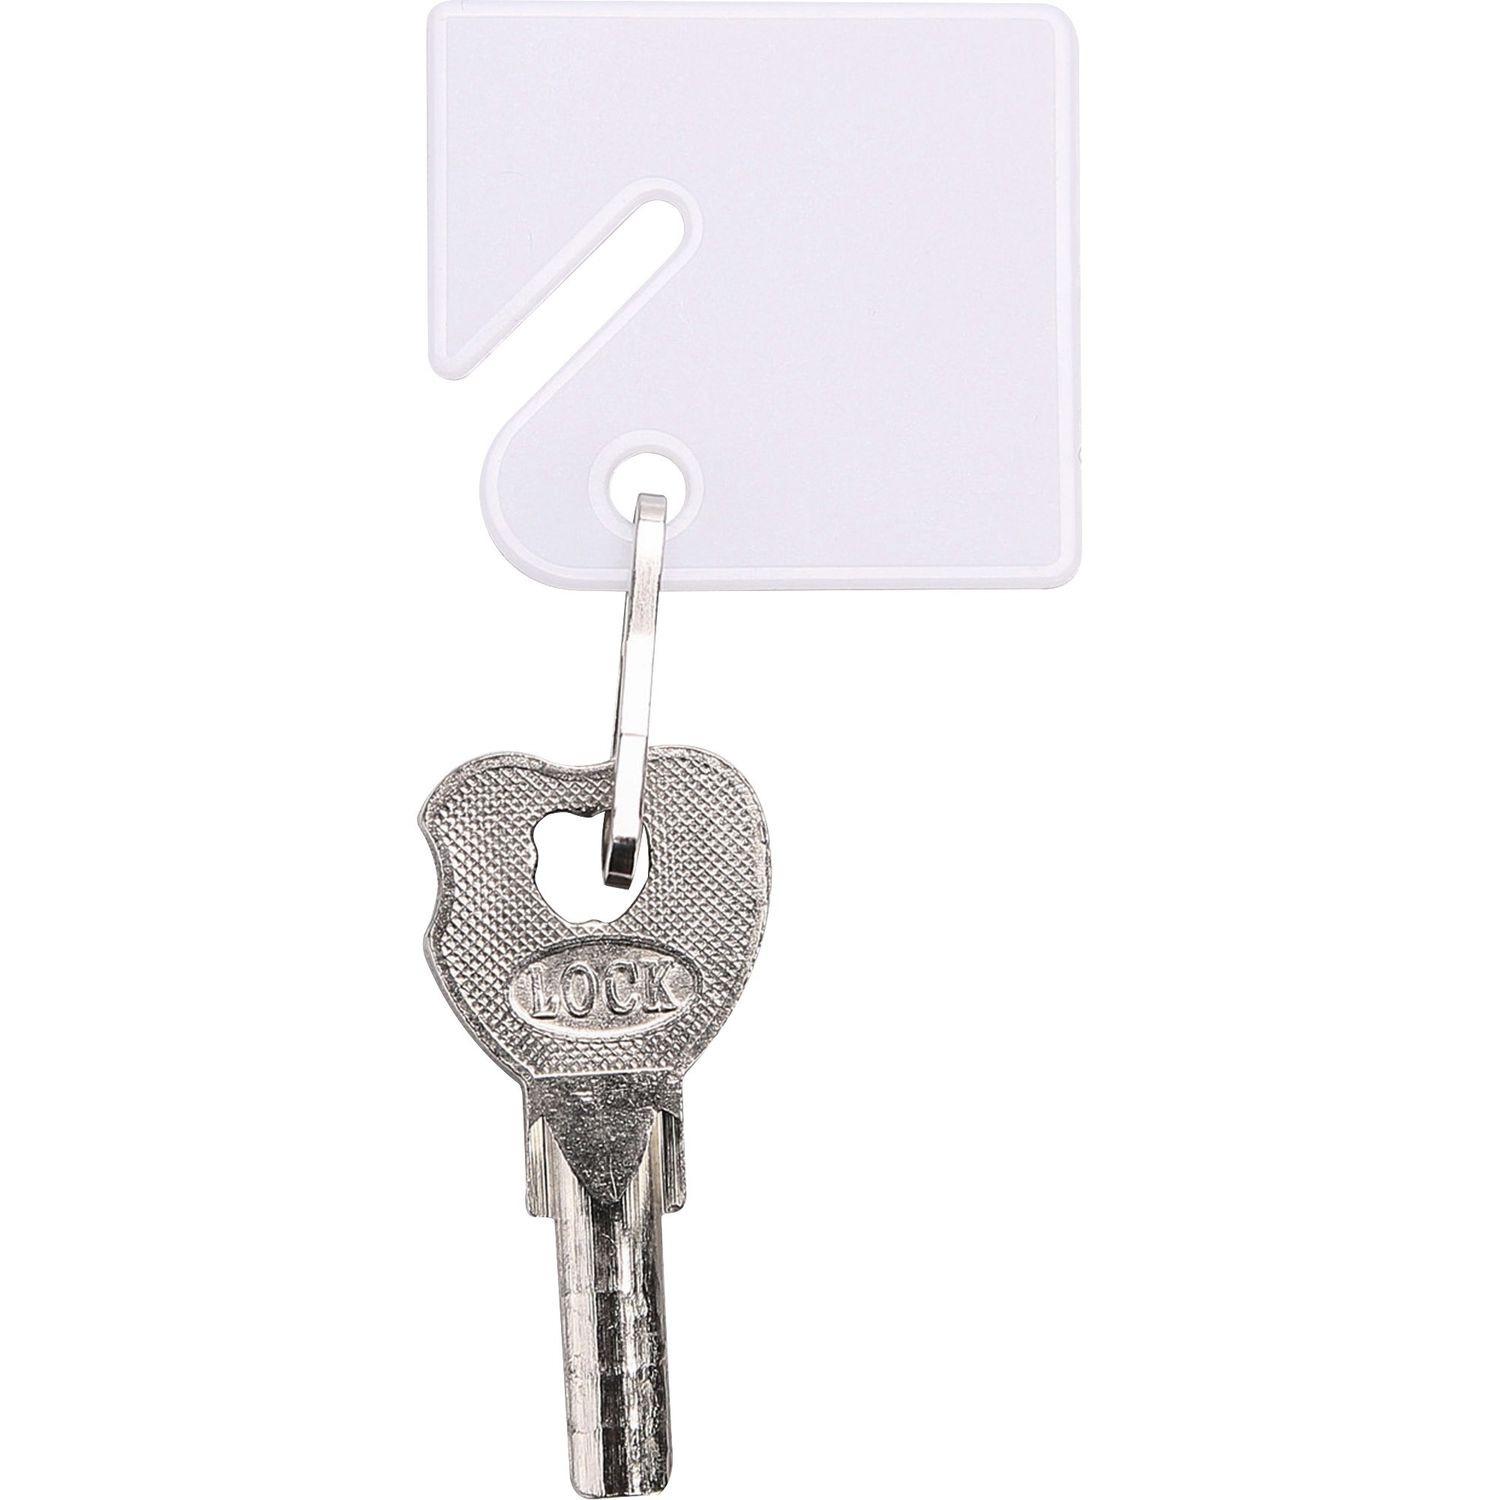 Square Key Tags 4.75" Length x 1.40" Width, Square, Hook Fastener, 20 / Pack, Plastic, White